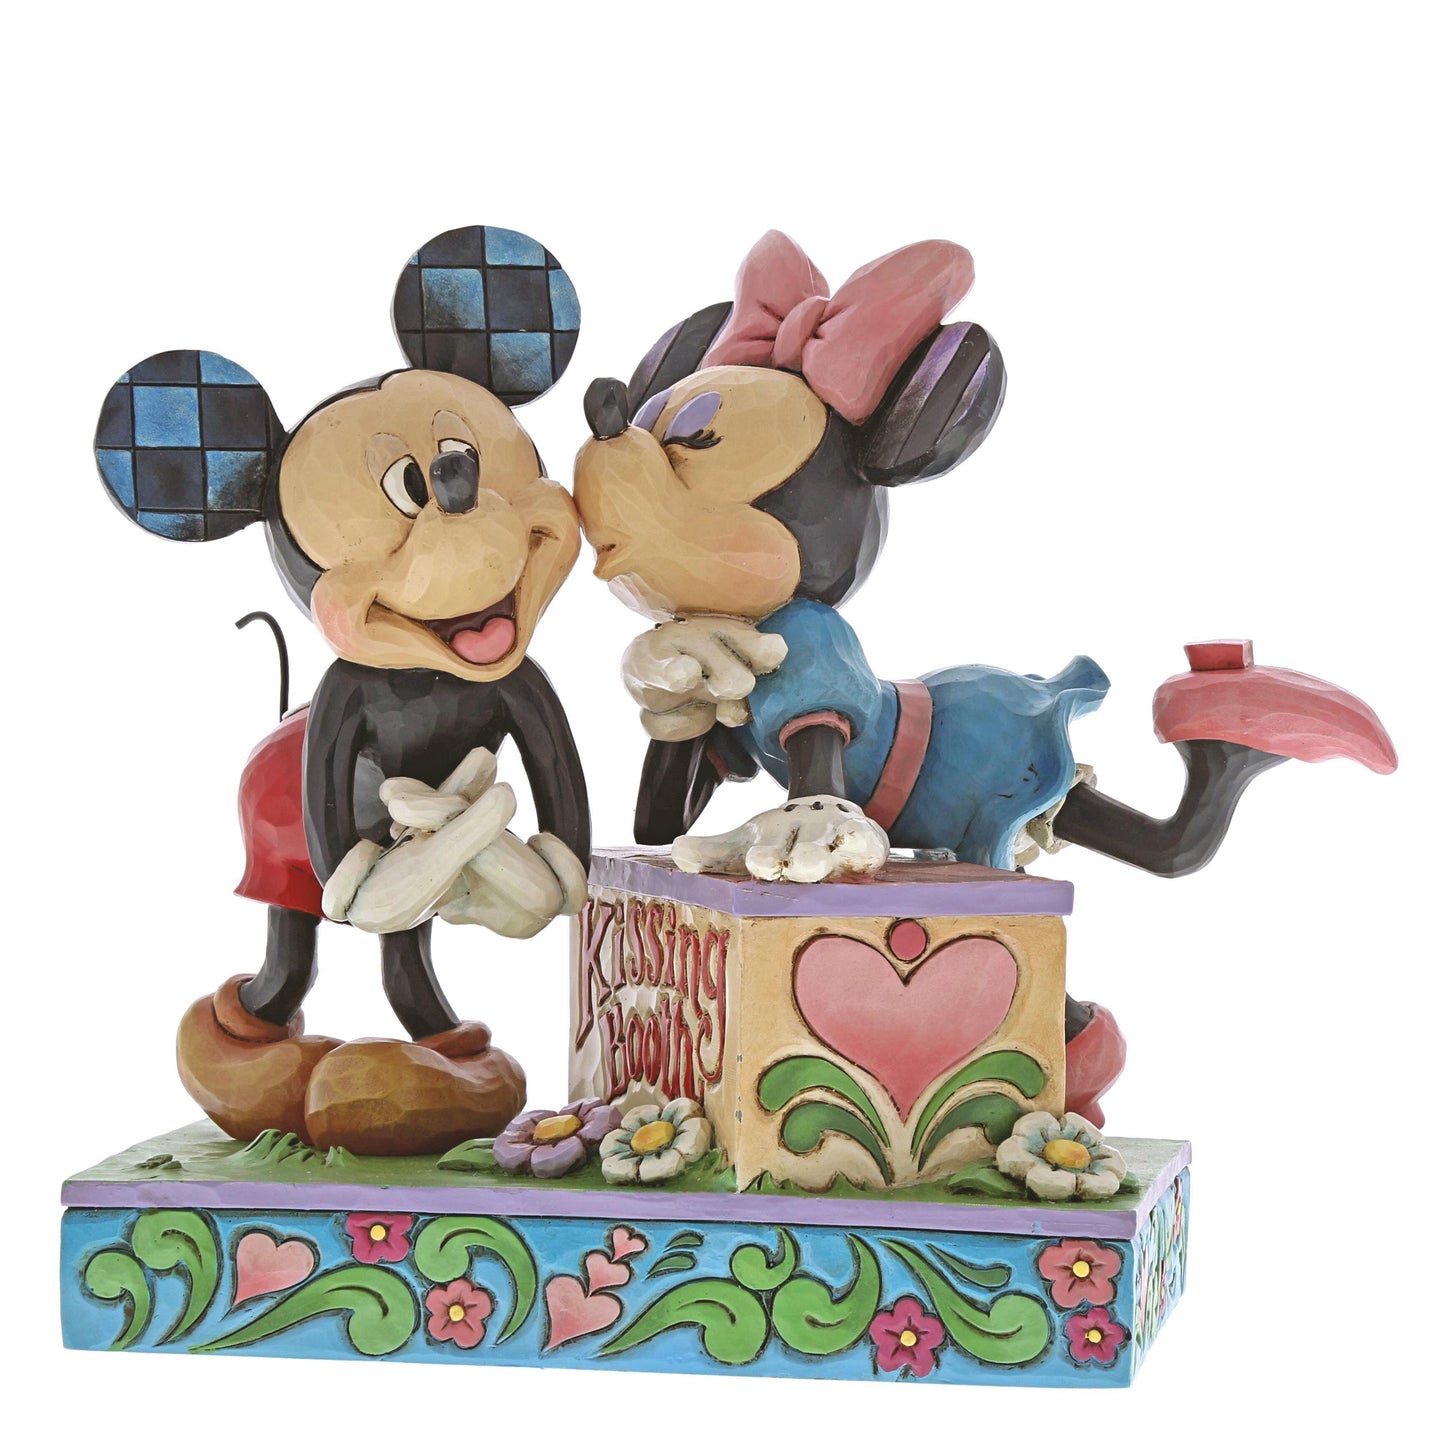 Kissing Booth (Mickey Mouse and Minnie Mouse Figurine) (Disney Traditions by Jim Shore) - Gallery Gifts Online 